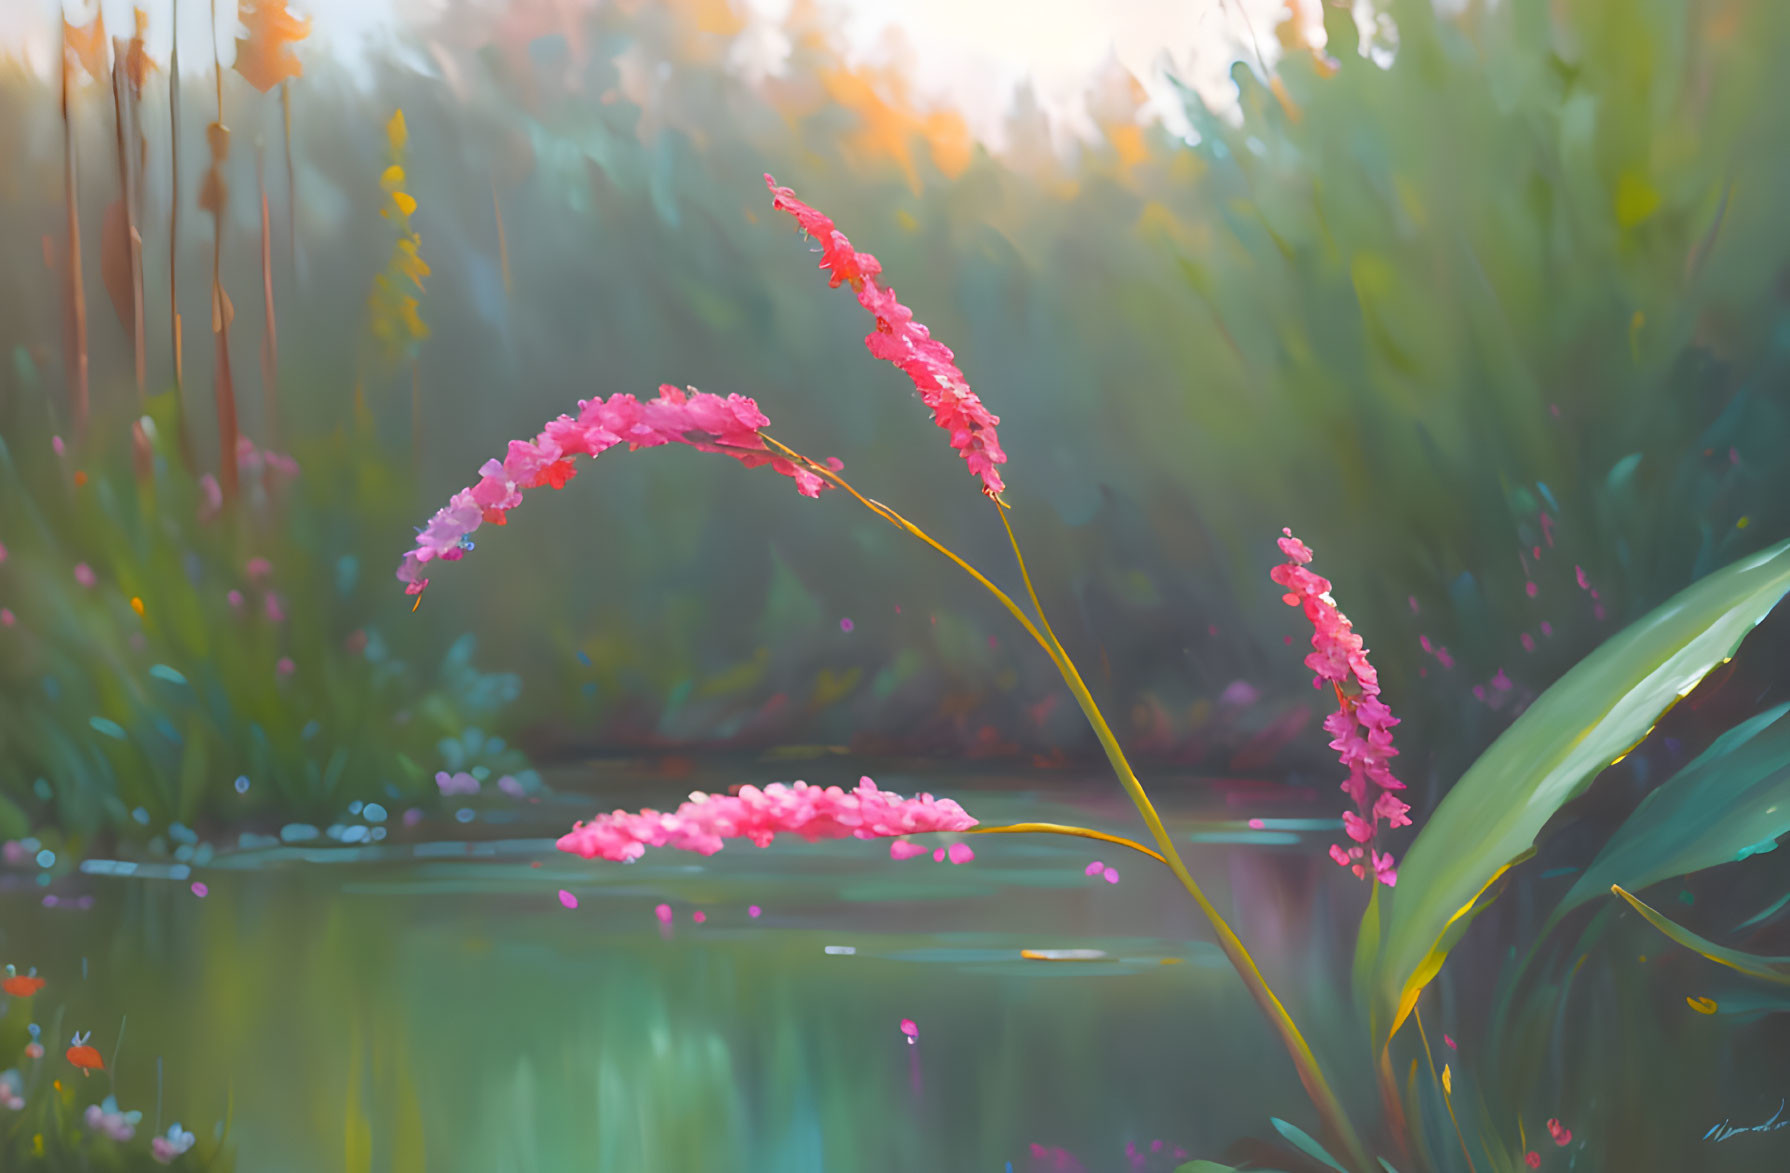 Tranquil pond with pink flowers and lush greenery